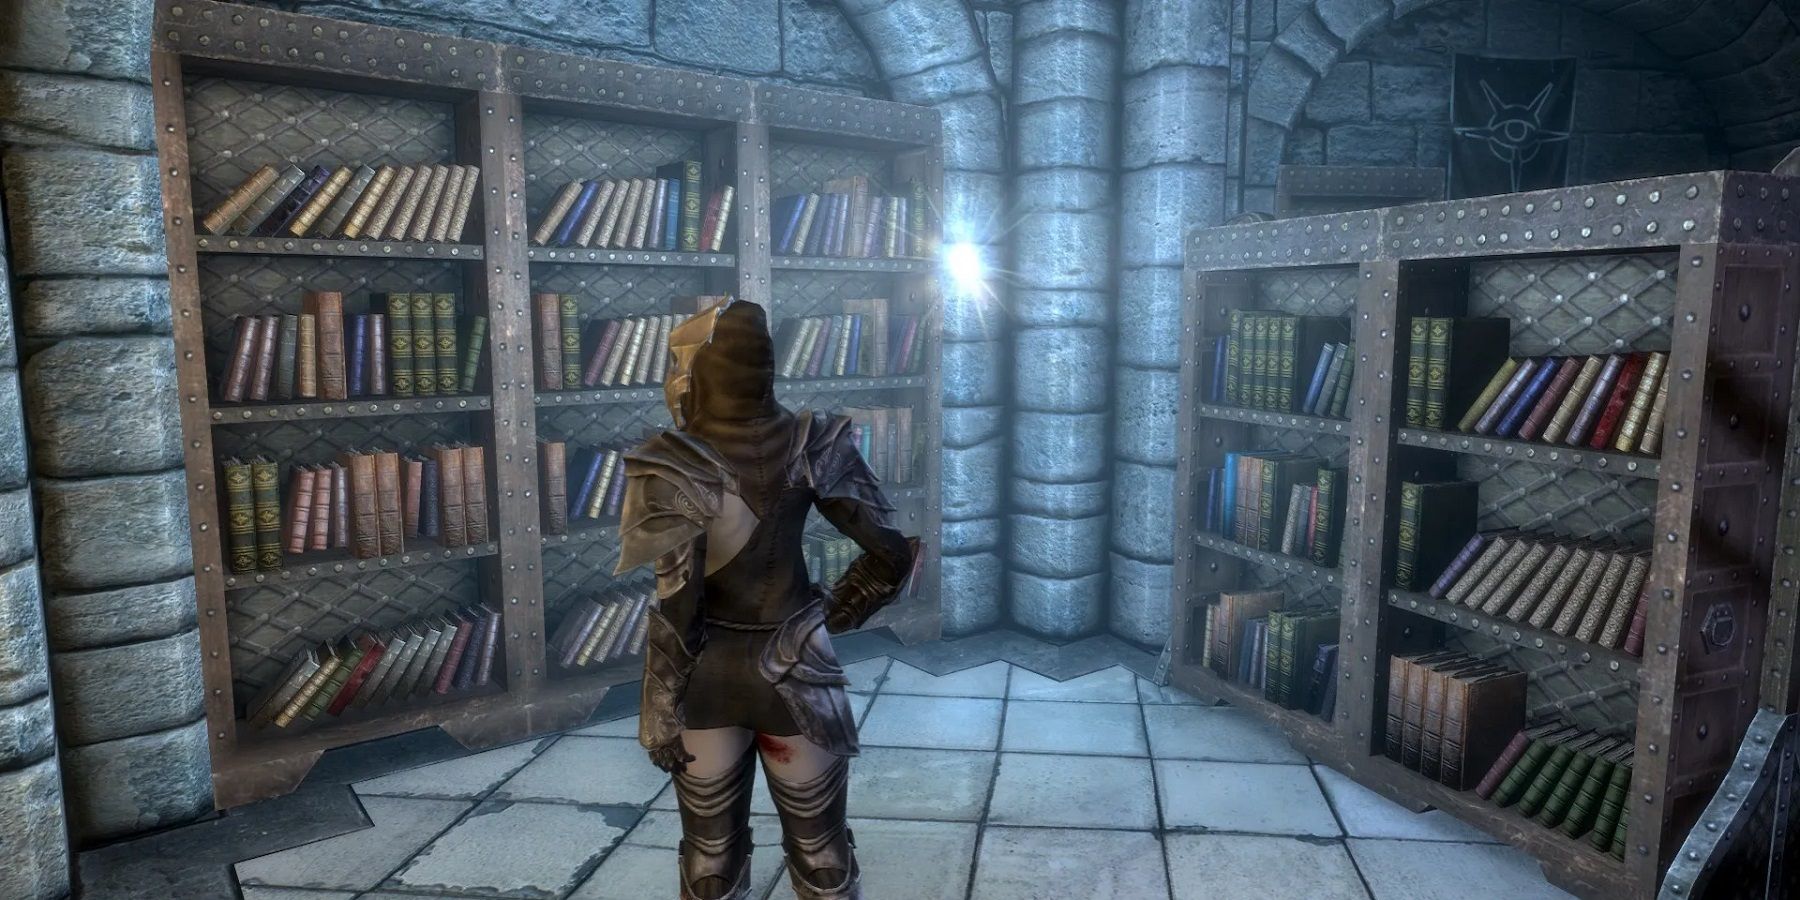 Screenshot from The Elder Scrolls 5: Skyrim showing a character stood in front of some book shelves.